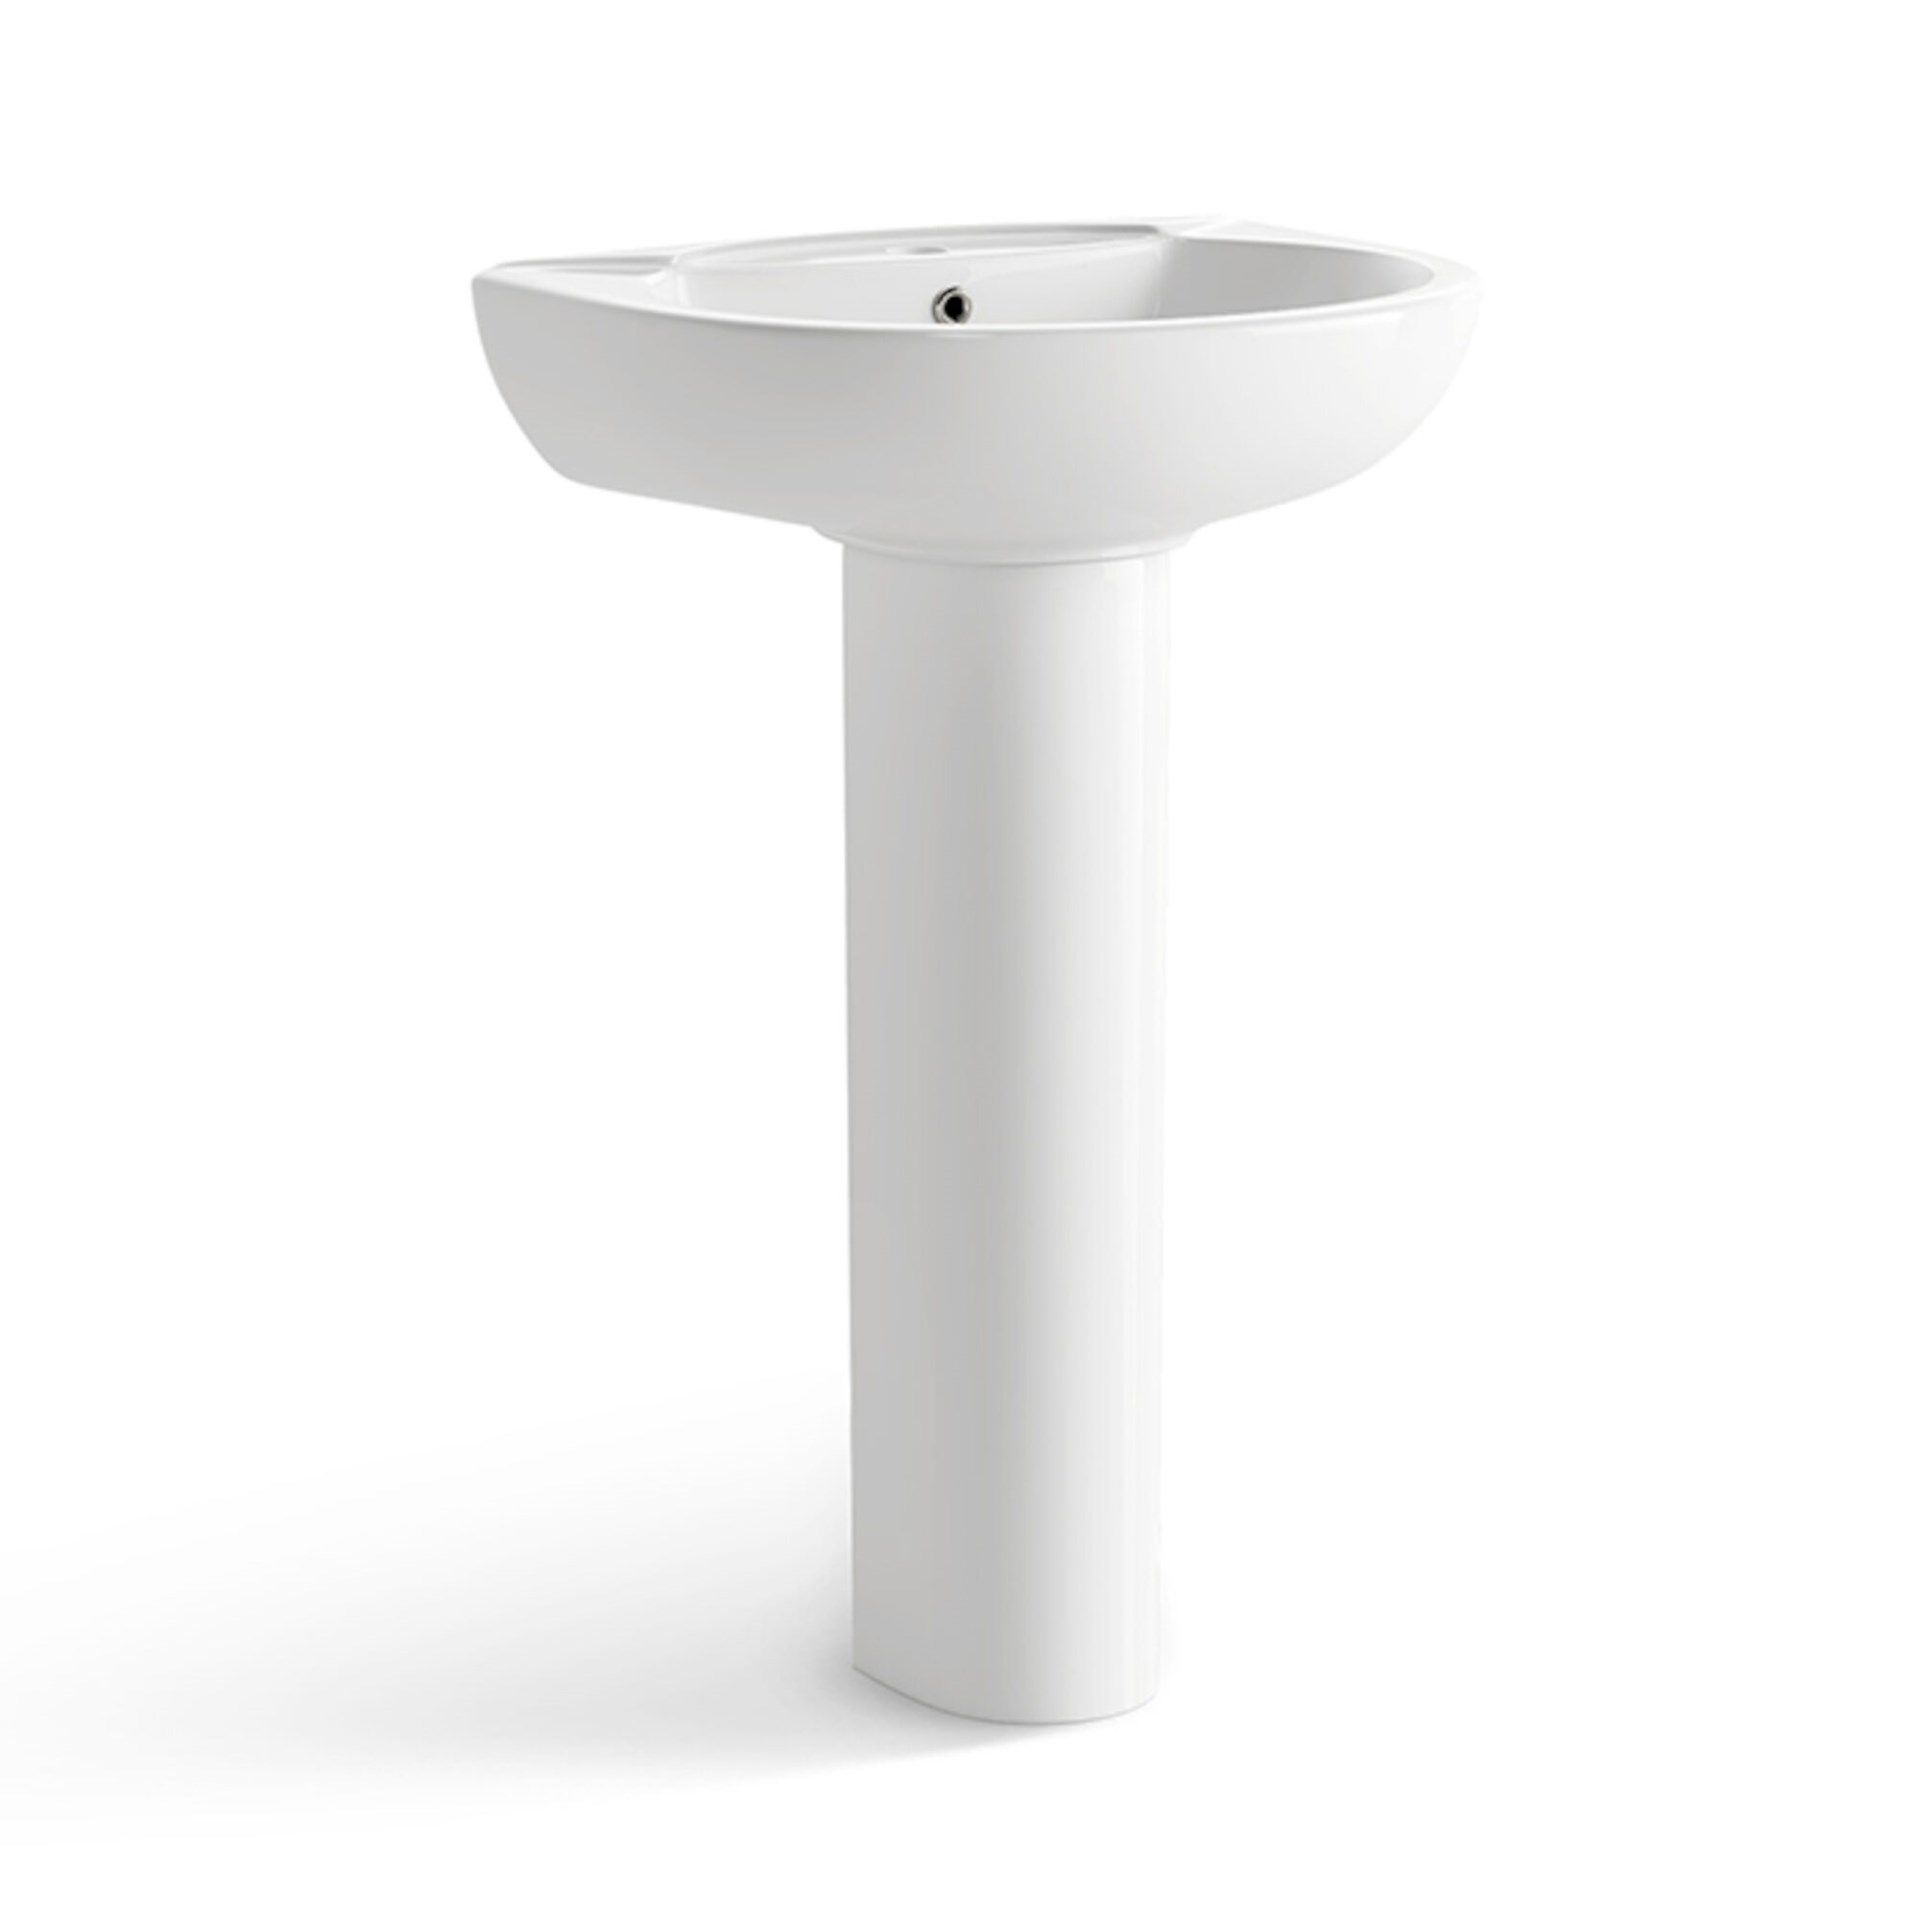 Quartz Sink & Pedestal - Single Tap Hole. Made from White Vitreous China and finished with a hi...